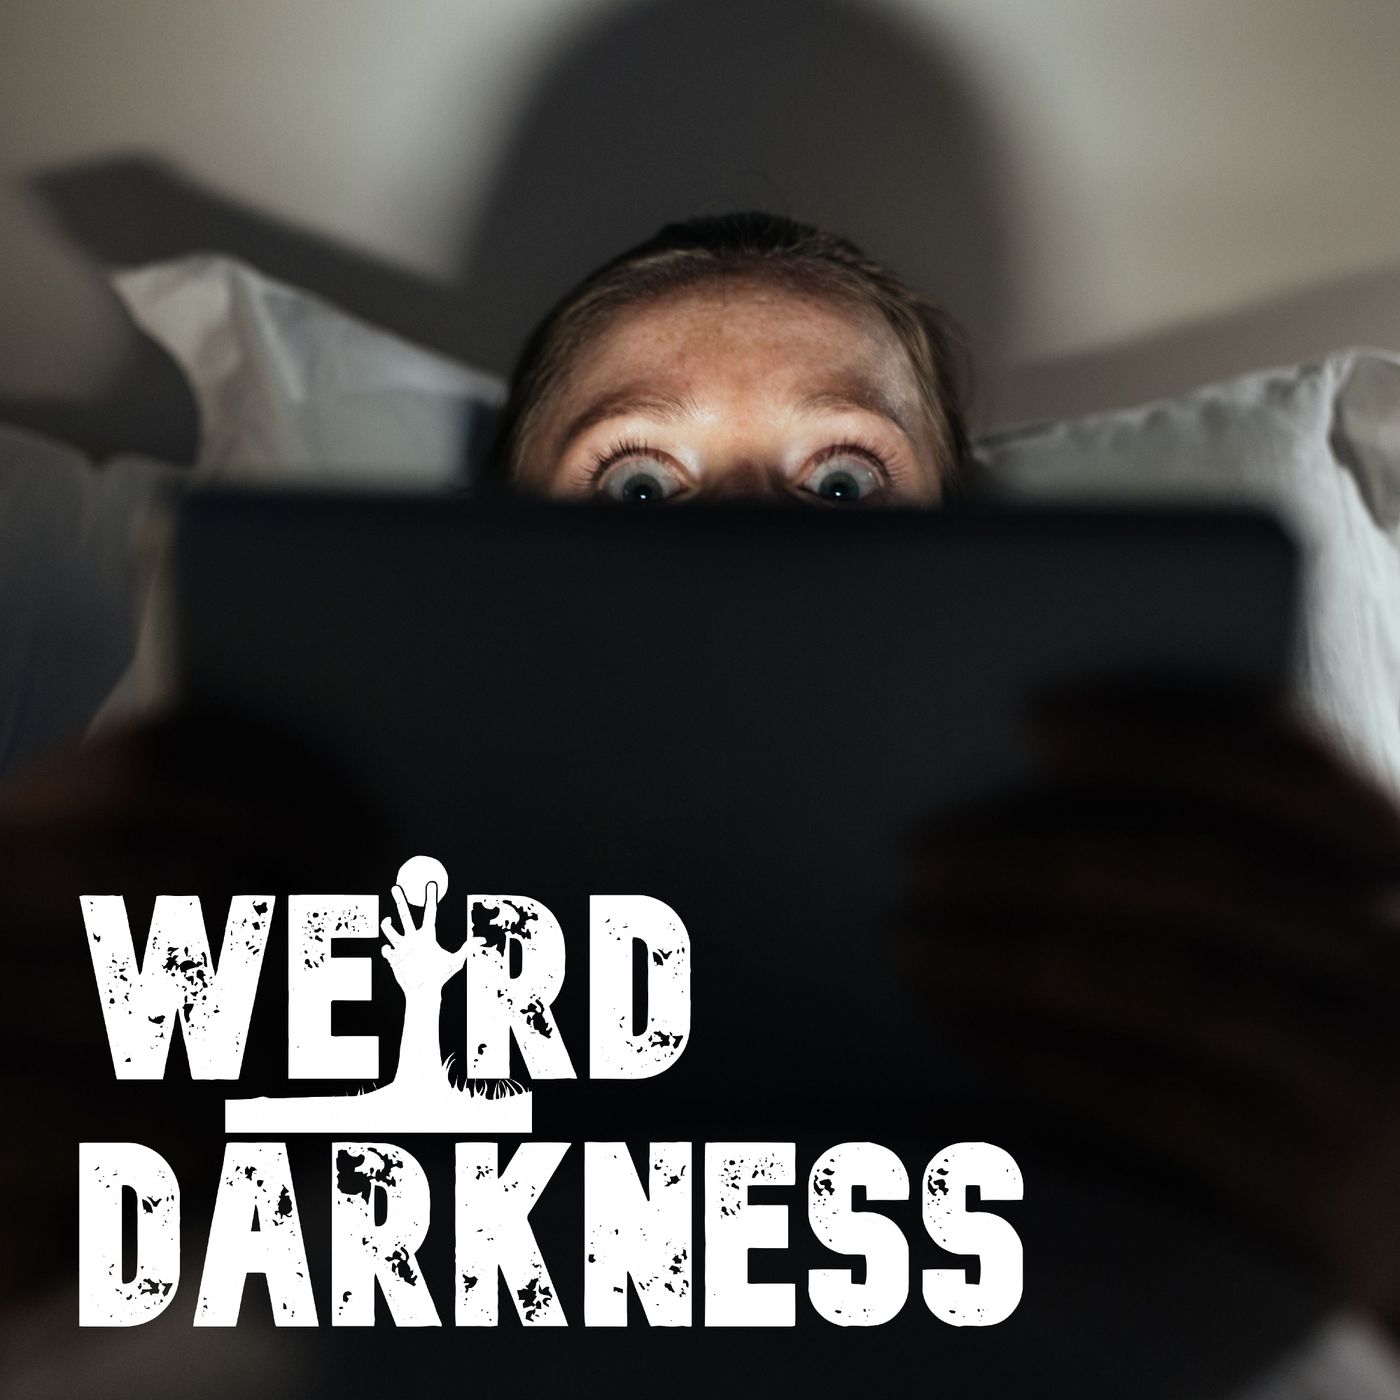 “WHY I DON’T WATCH GHOST STORIES ON THE INTERNET ANYMORE” and More True Horrors! #WeirdDarkness